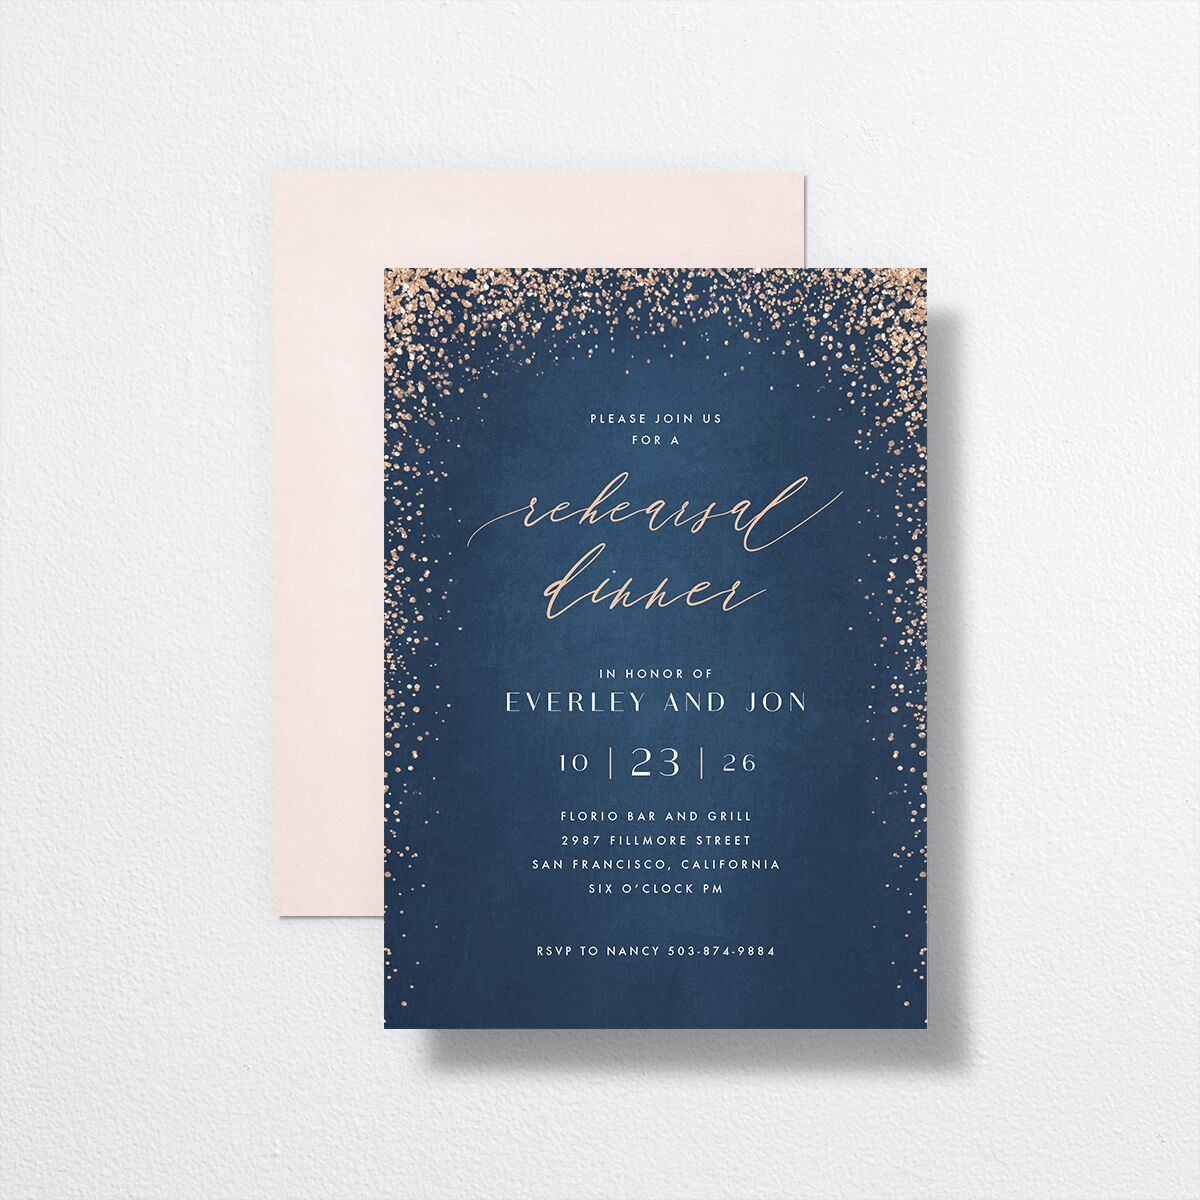 Sparkling Romance Rehearsal Dinner Invitations front-and-back in blue